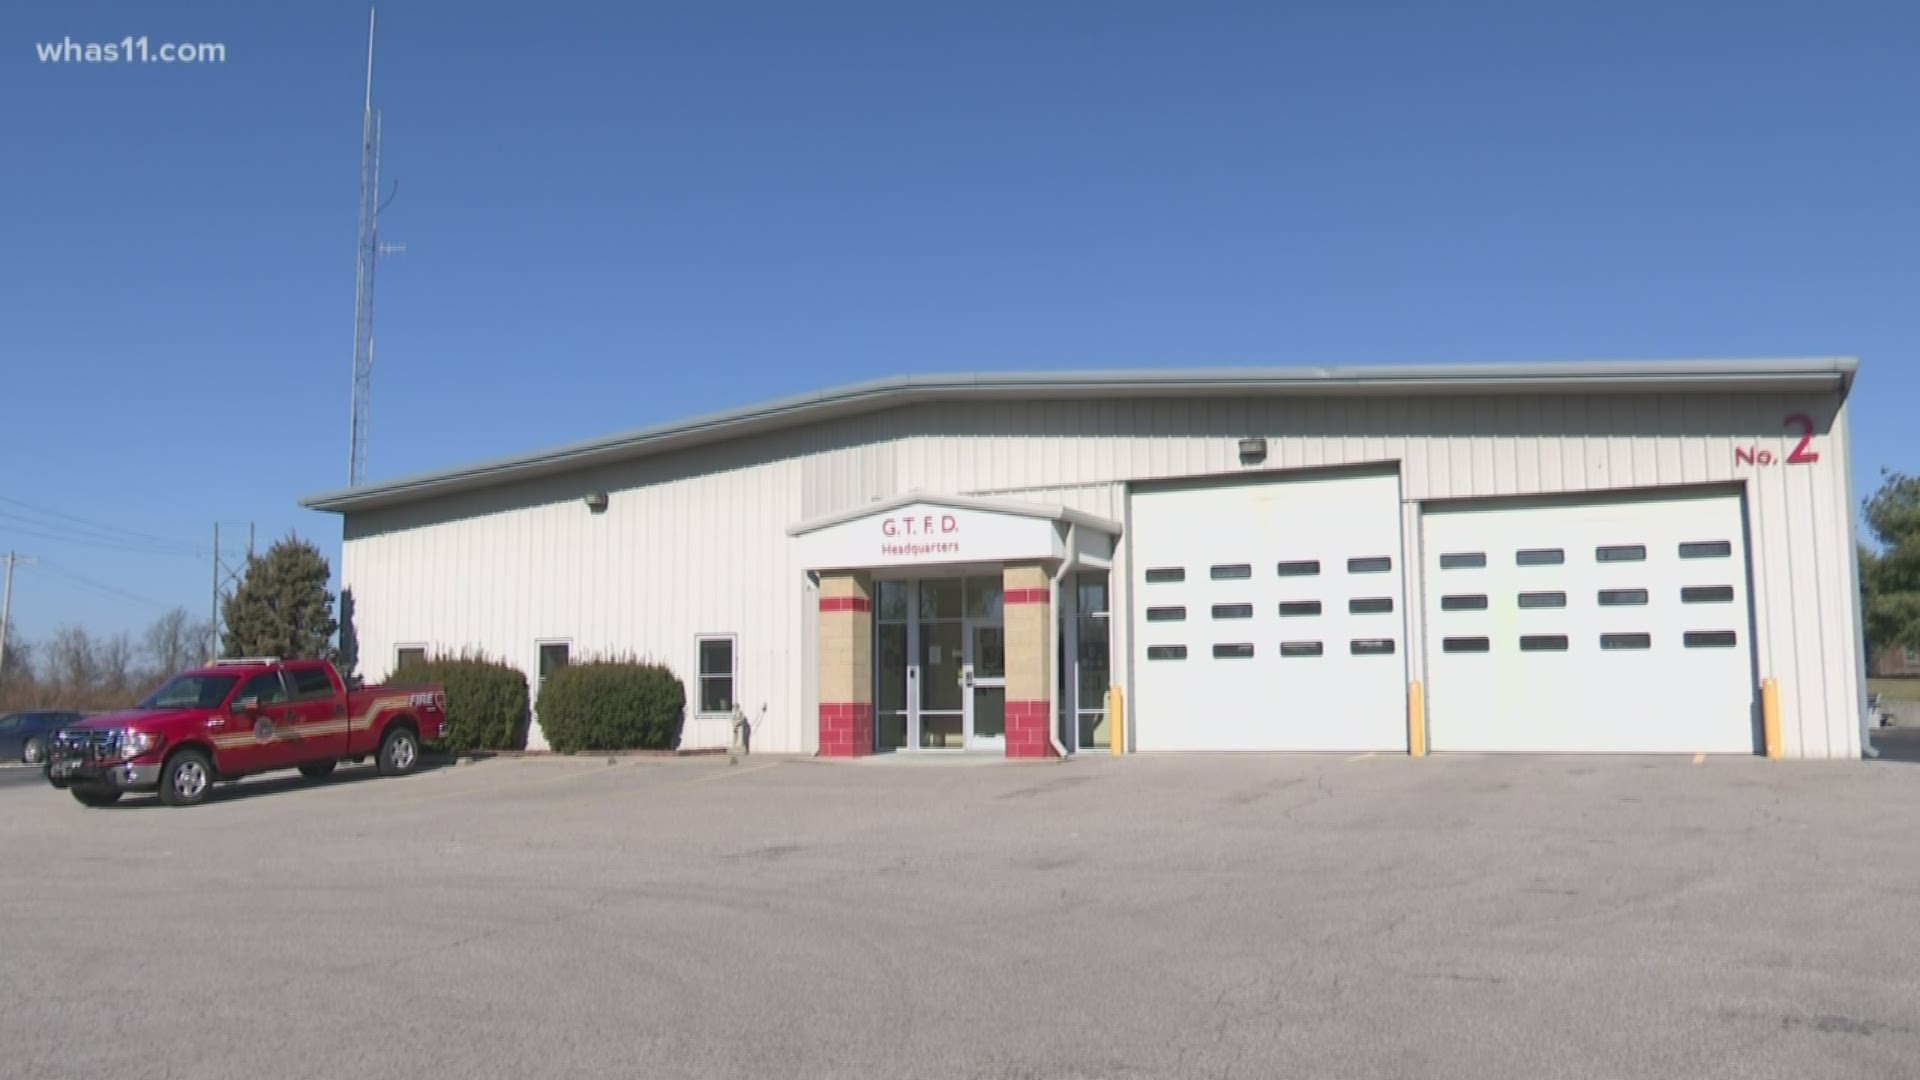 A Southern Indiana fire chief asked to resign after accusations of bullying, intimidation and physical violence.